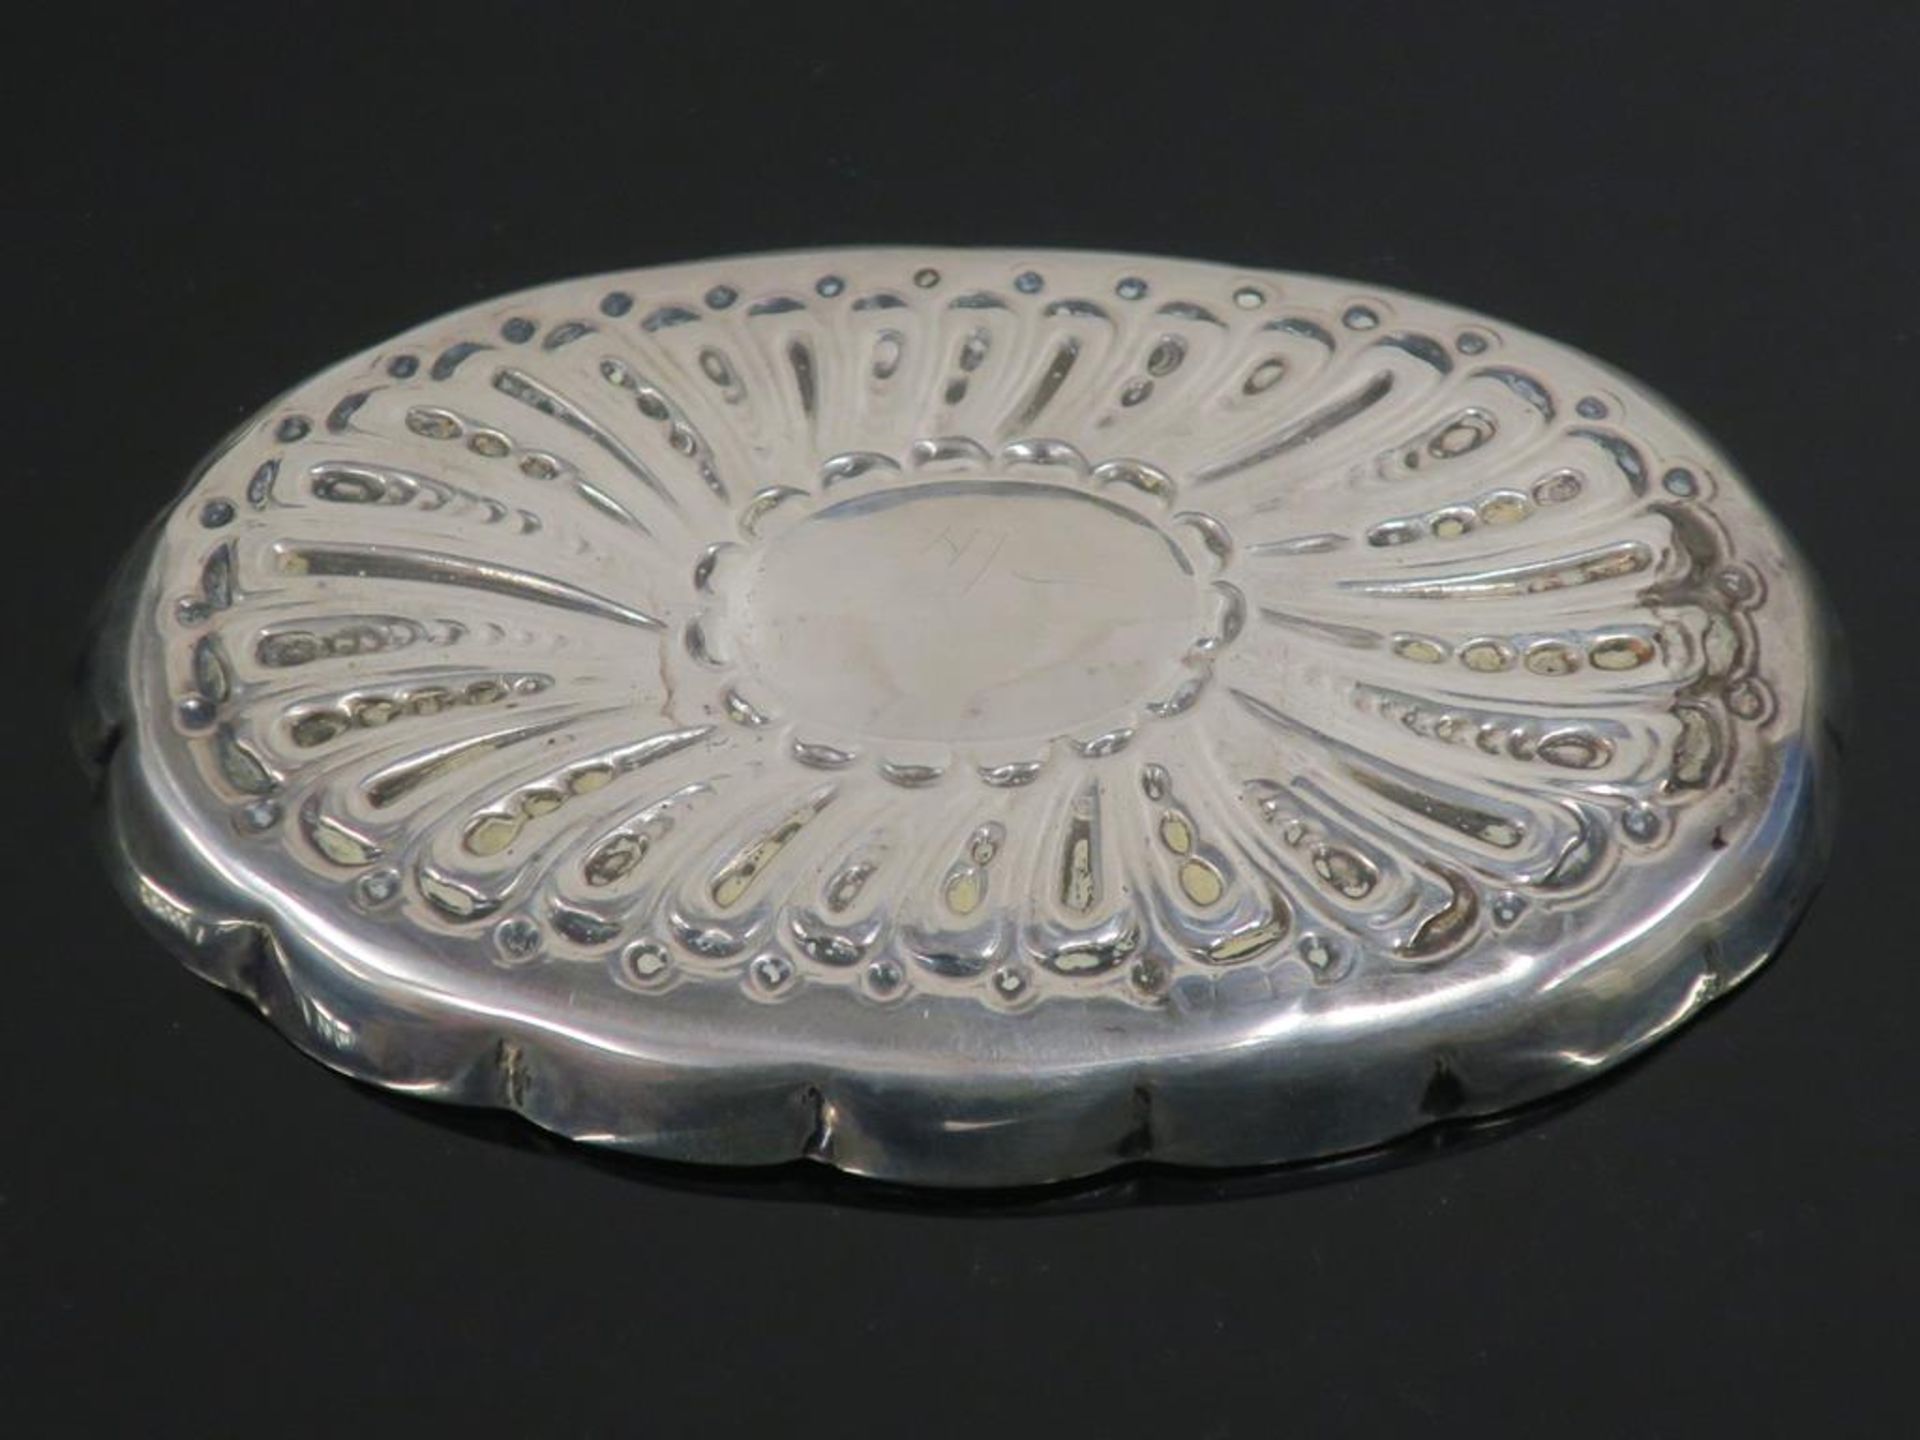 An Embossed Antique Silver Tray by WH Comyns (London 1892) (approx 38g) (est £30-£60) - Image 2 of 3